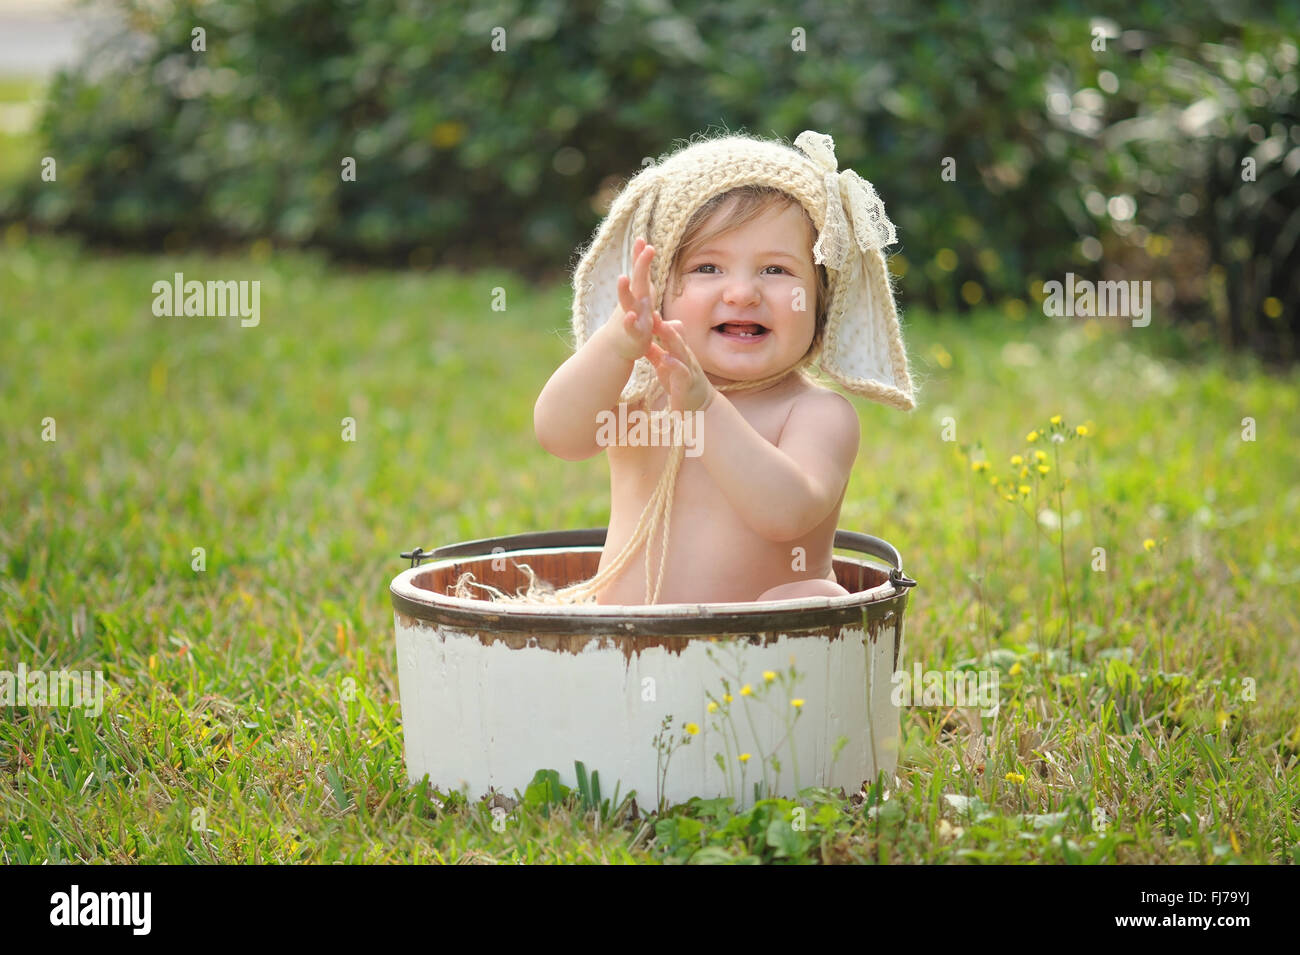 A smiling baby girl wearing a crocheted, bunny bonnet. Stock Photo